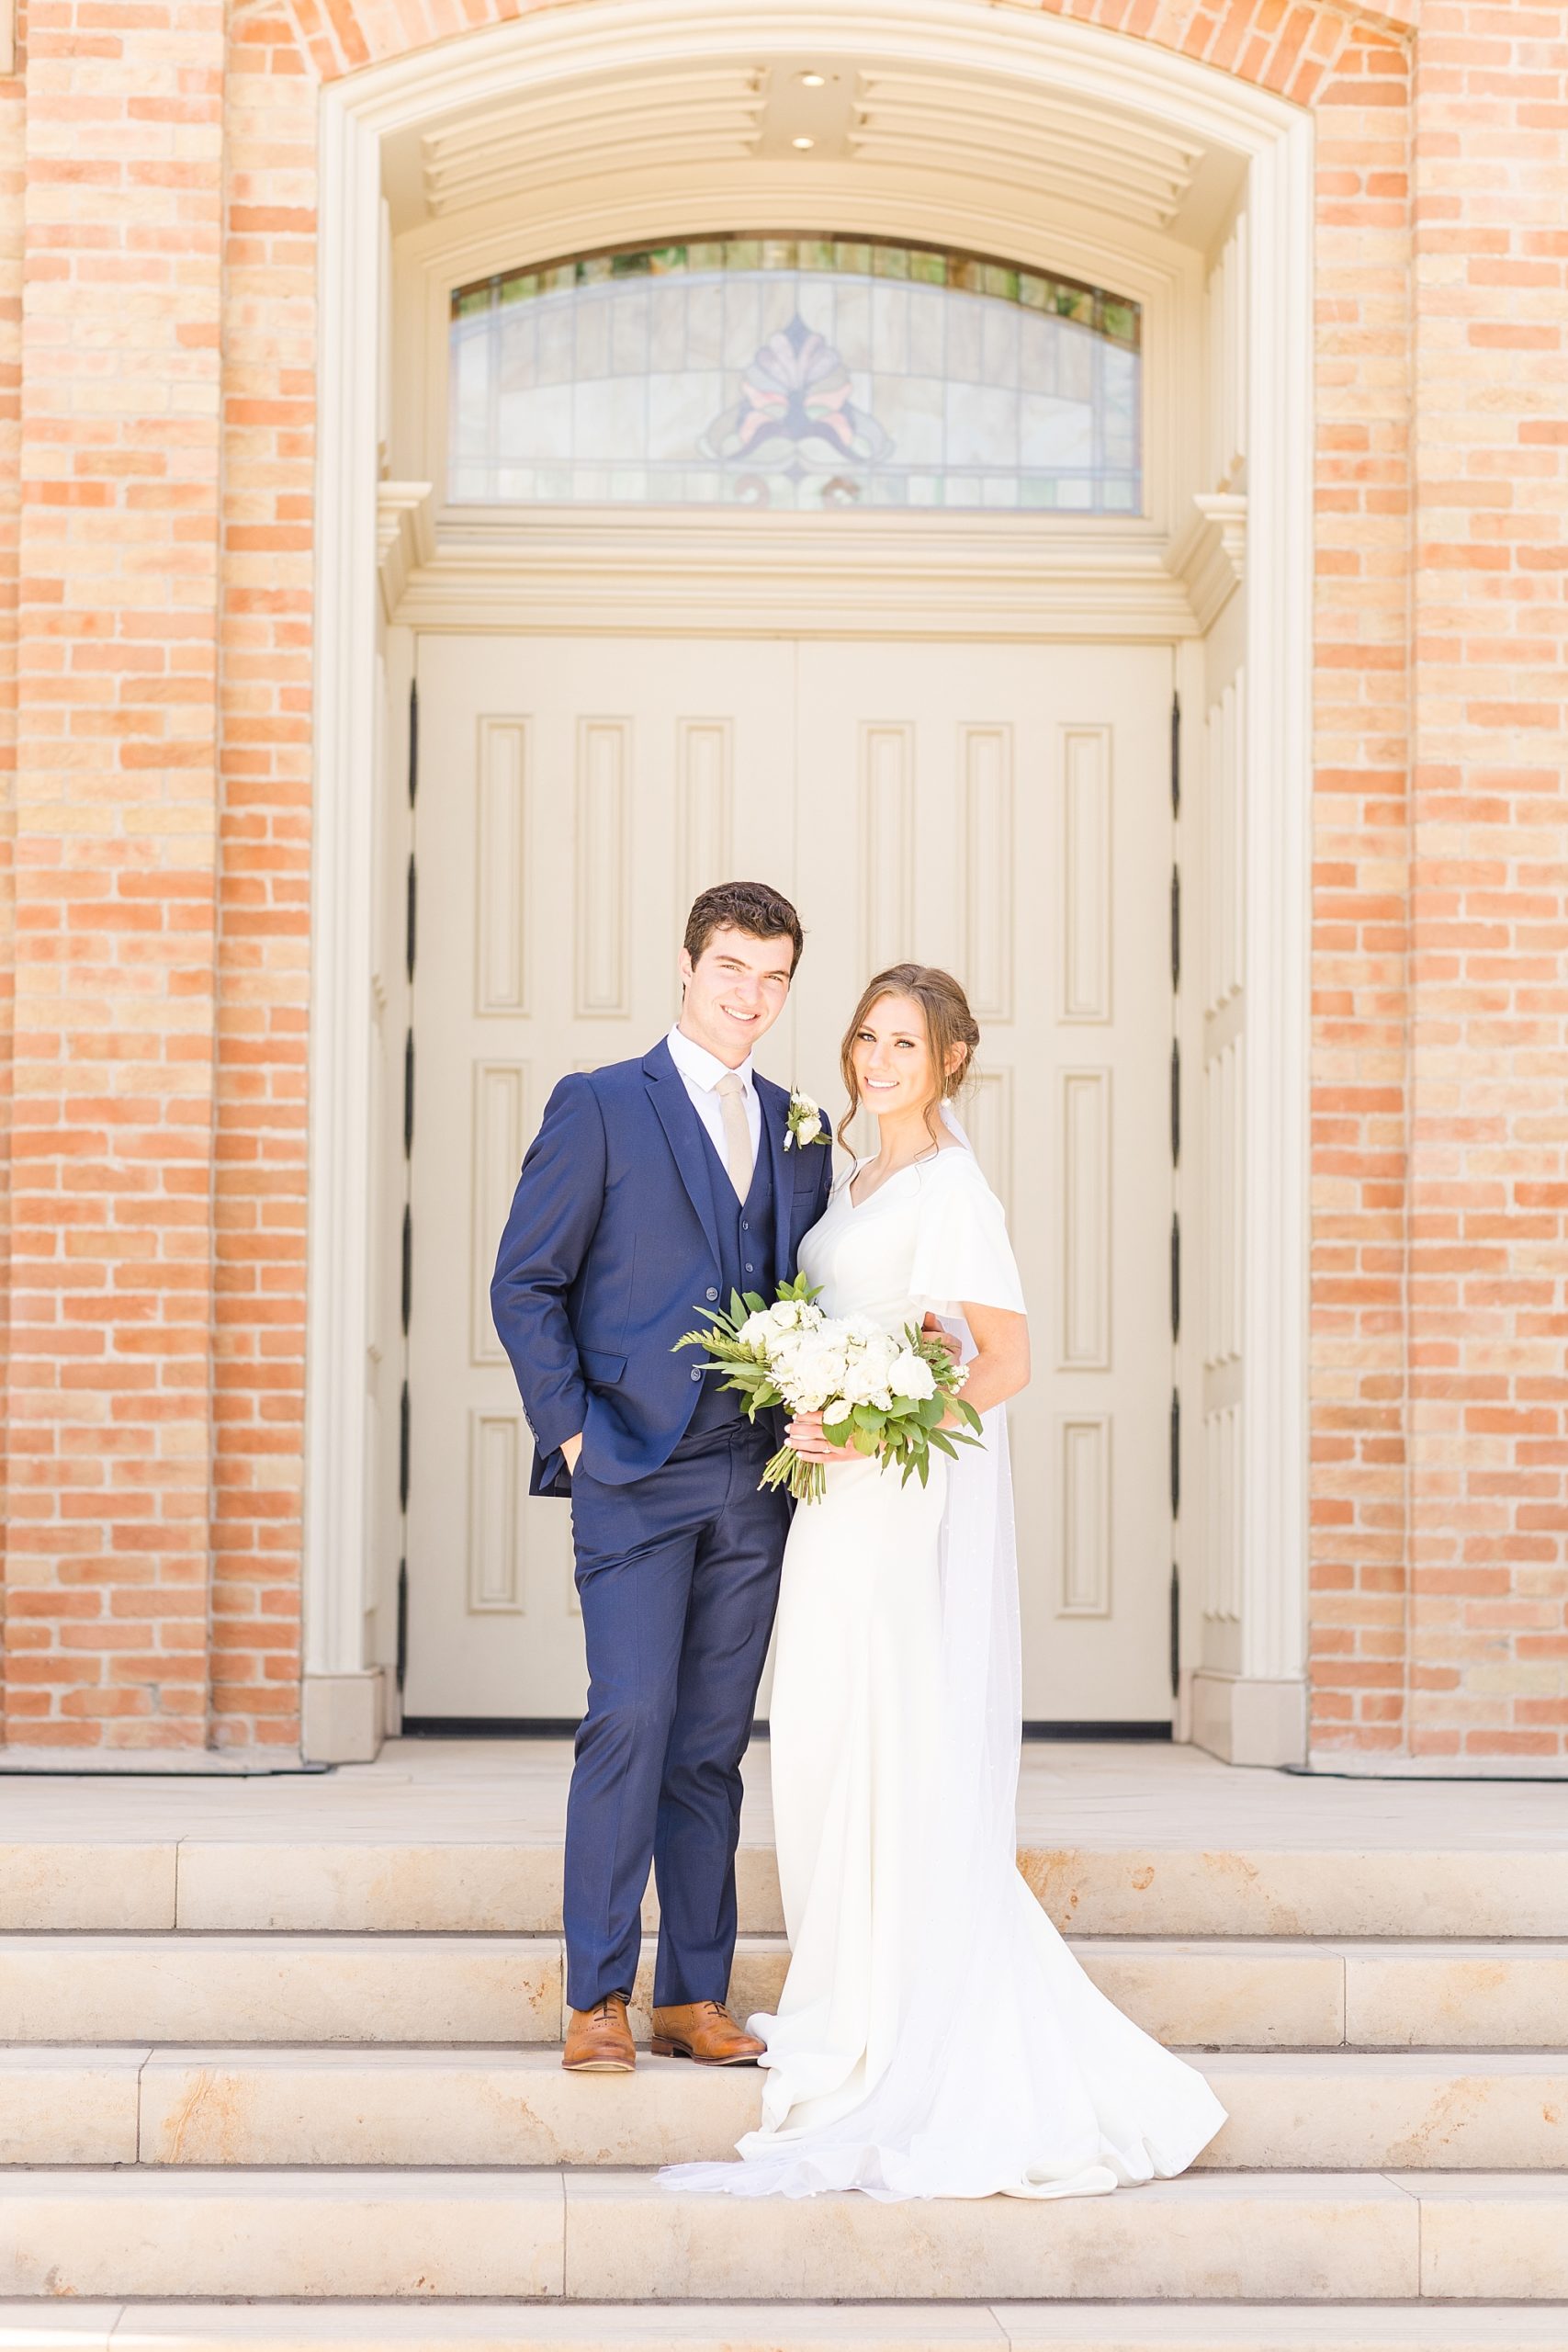 Wedding photography in Provo